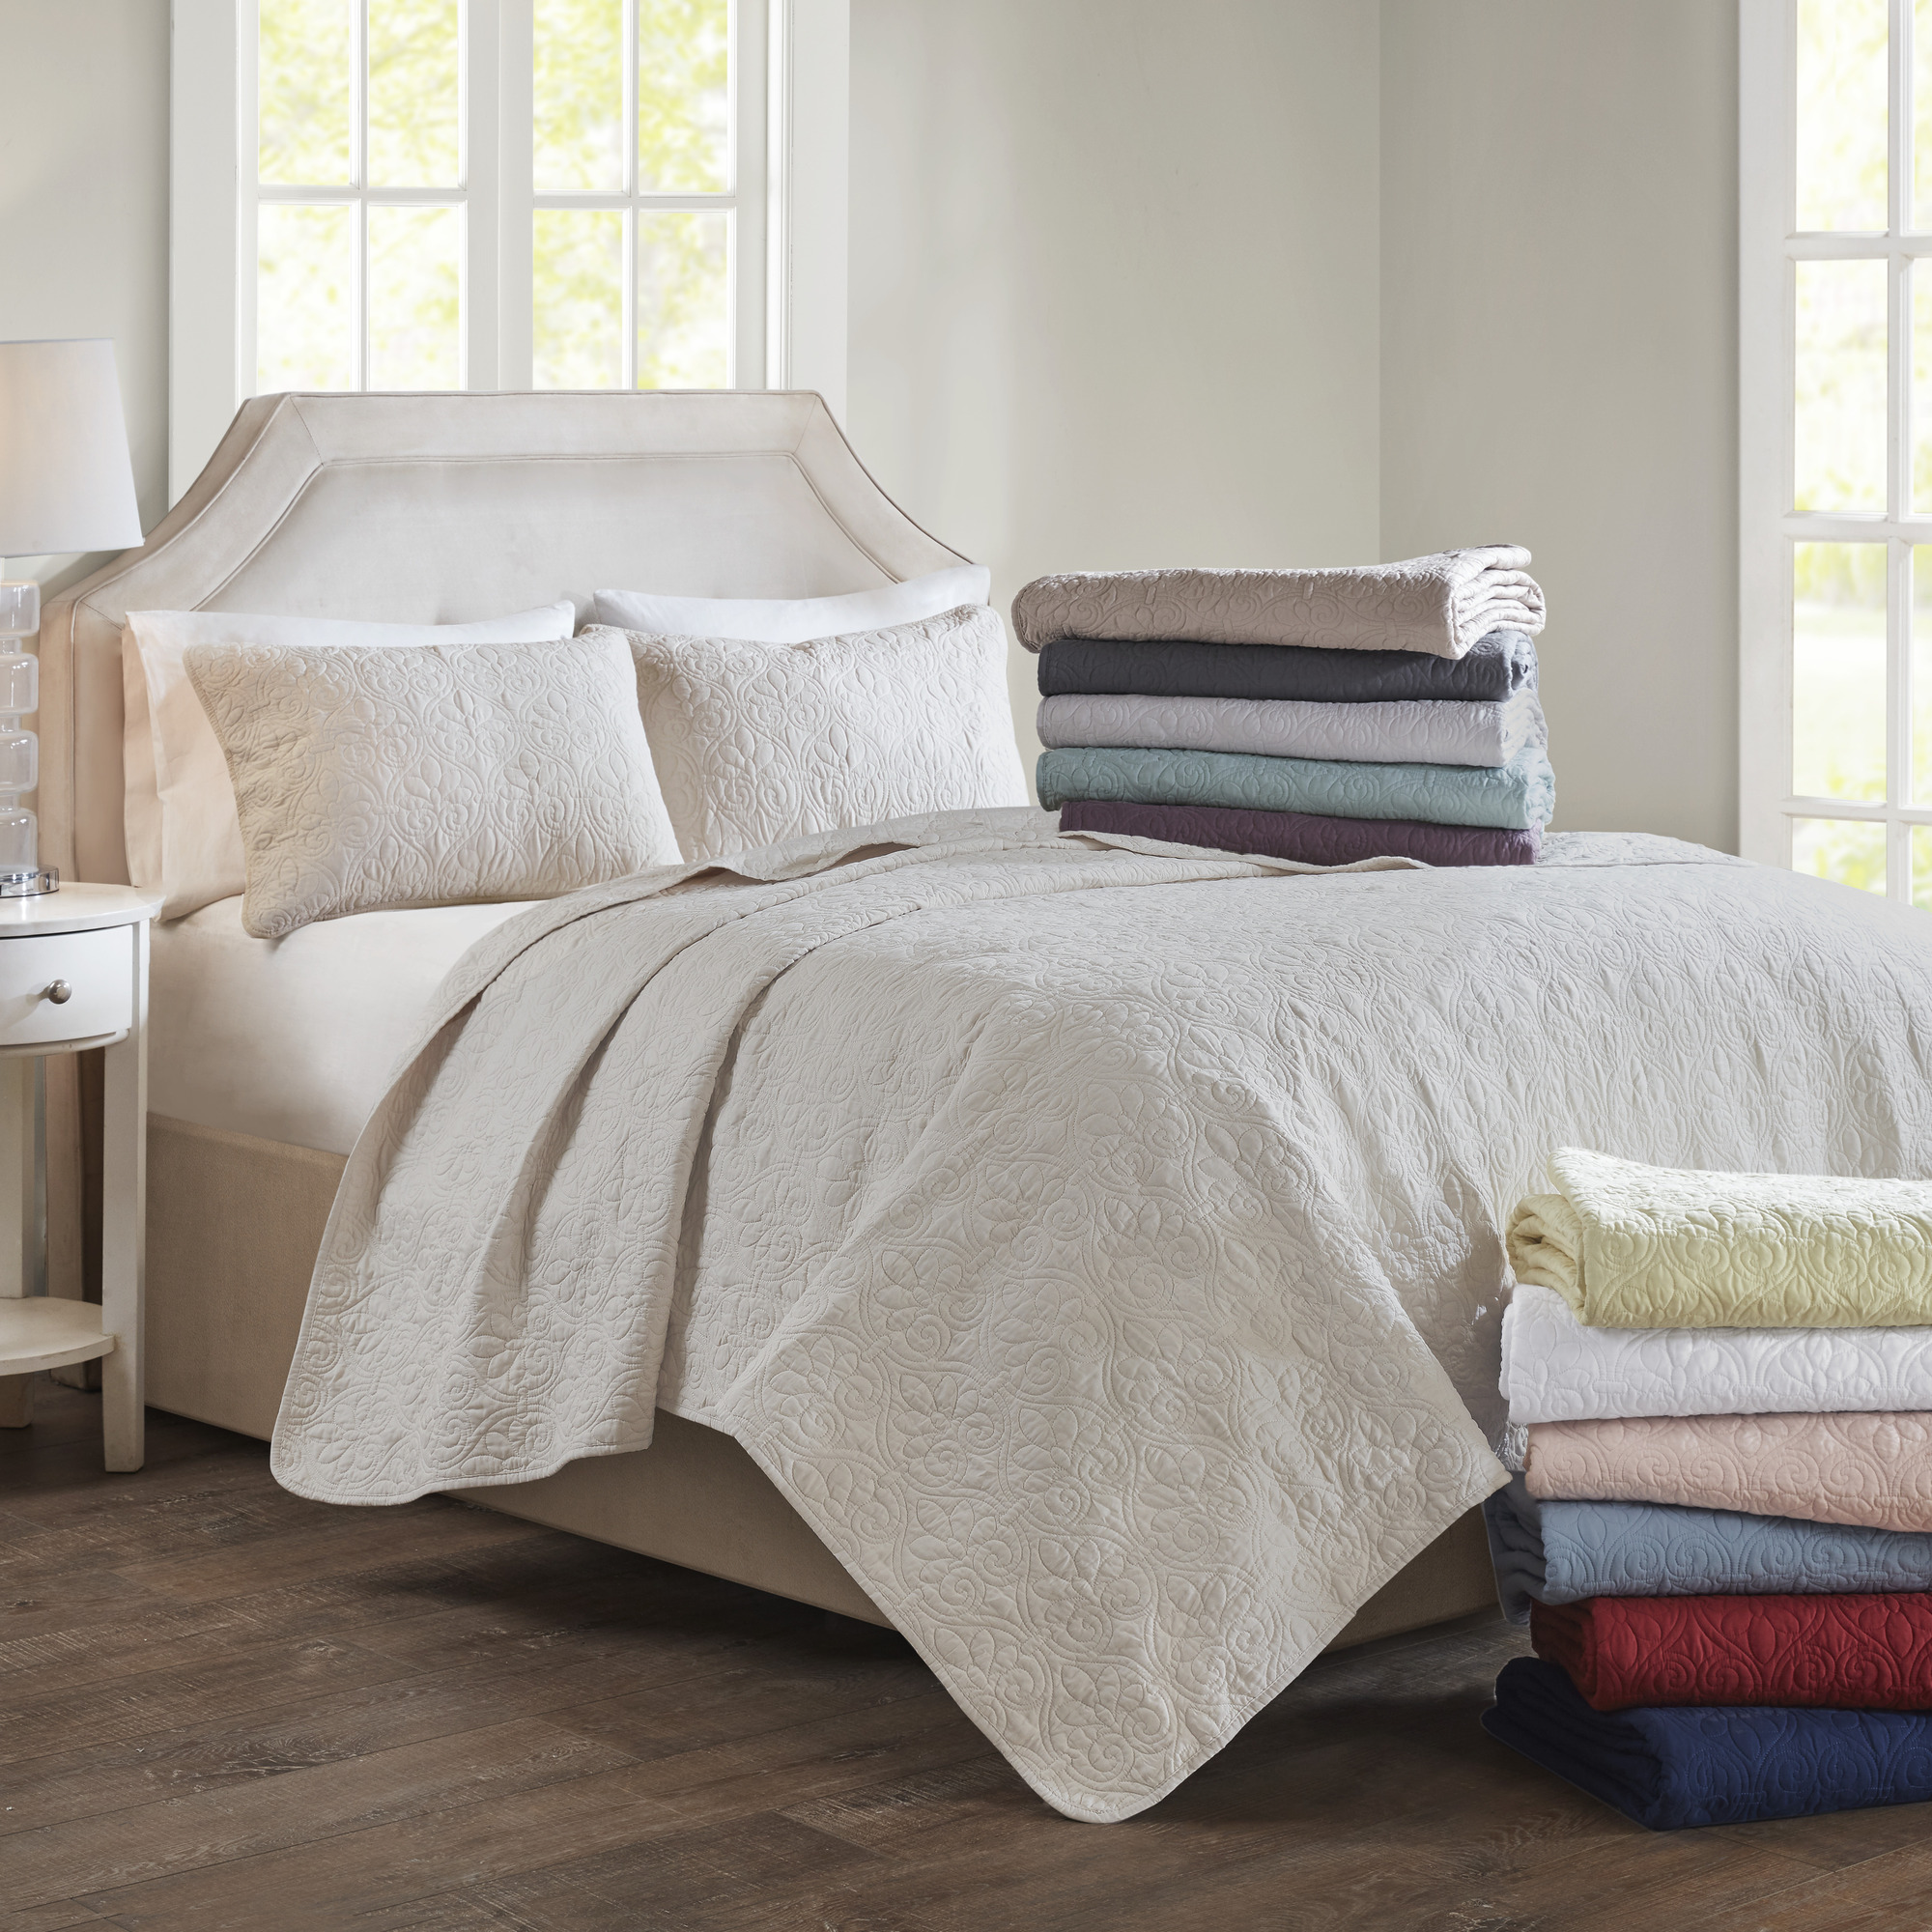 Home Essence Vancouver Super Soft Reversible Coverlet Set, Full/Queen, Blush - image 3 of 14